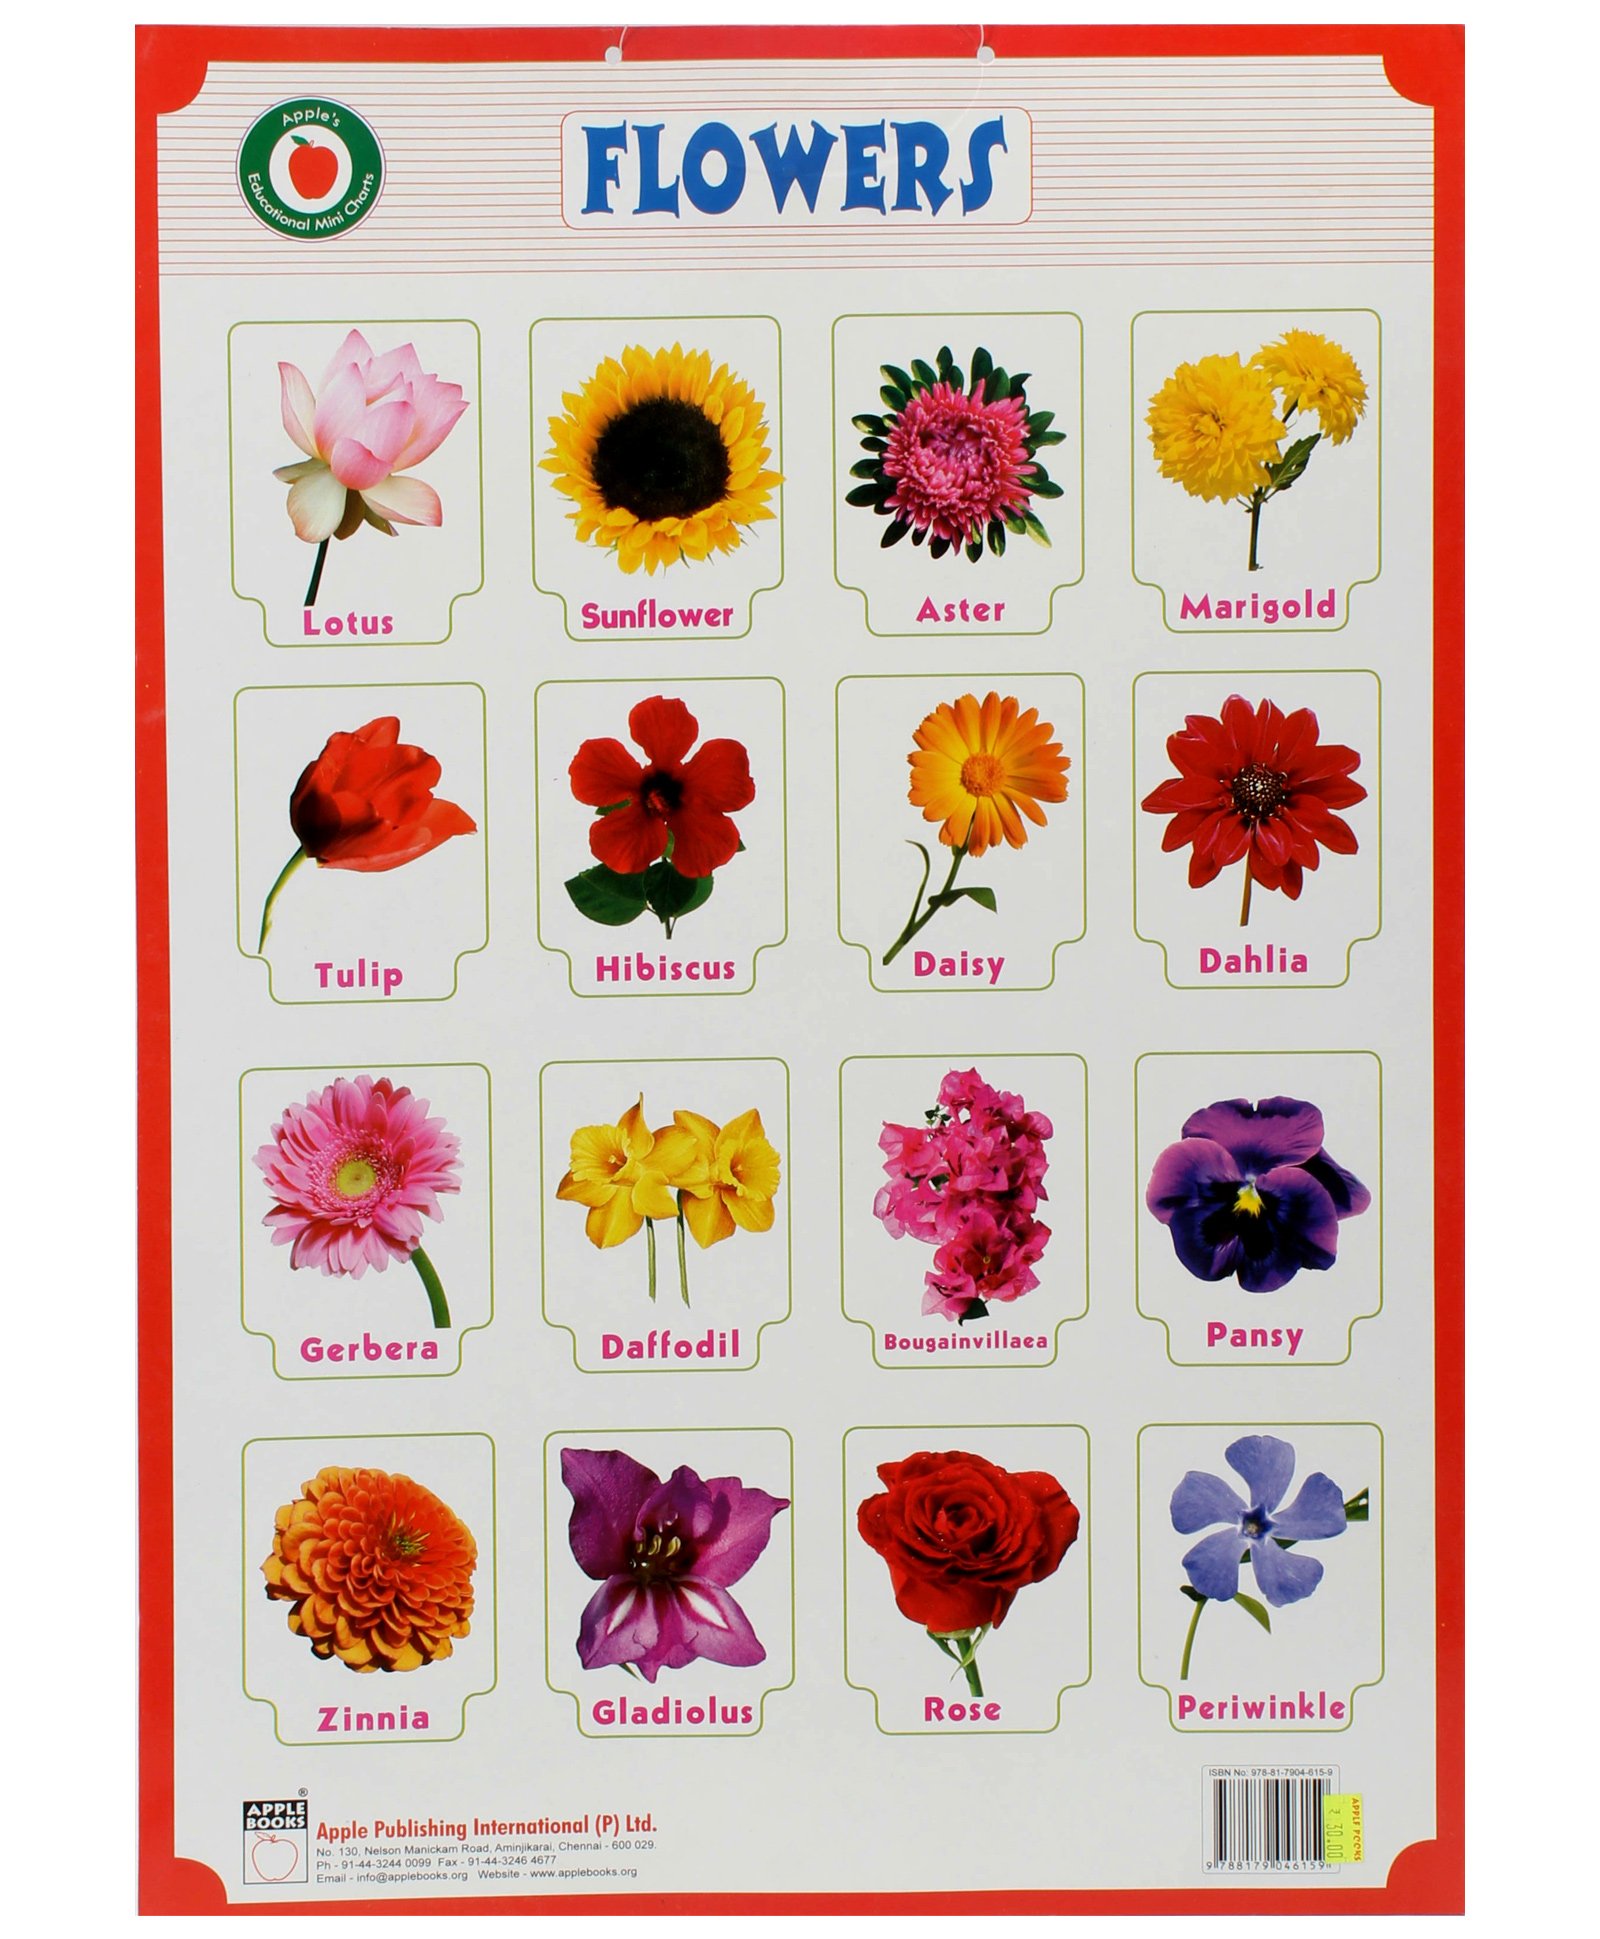 Different Flower Names - Types of Flowers: List of 50+ Popular Flowers ...